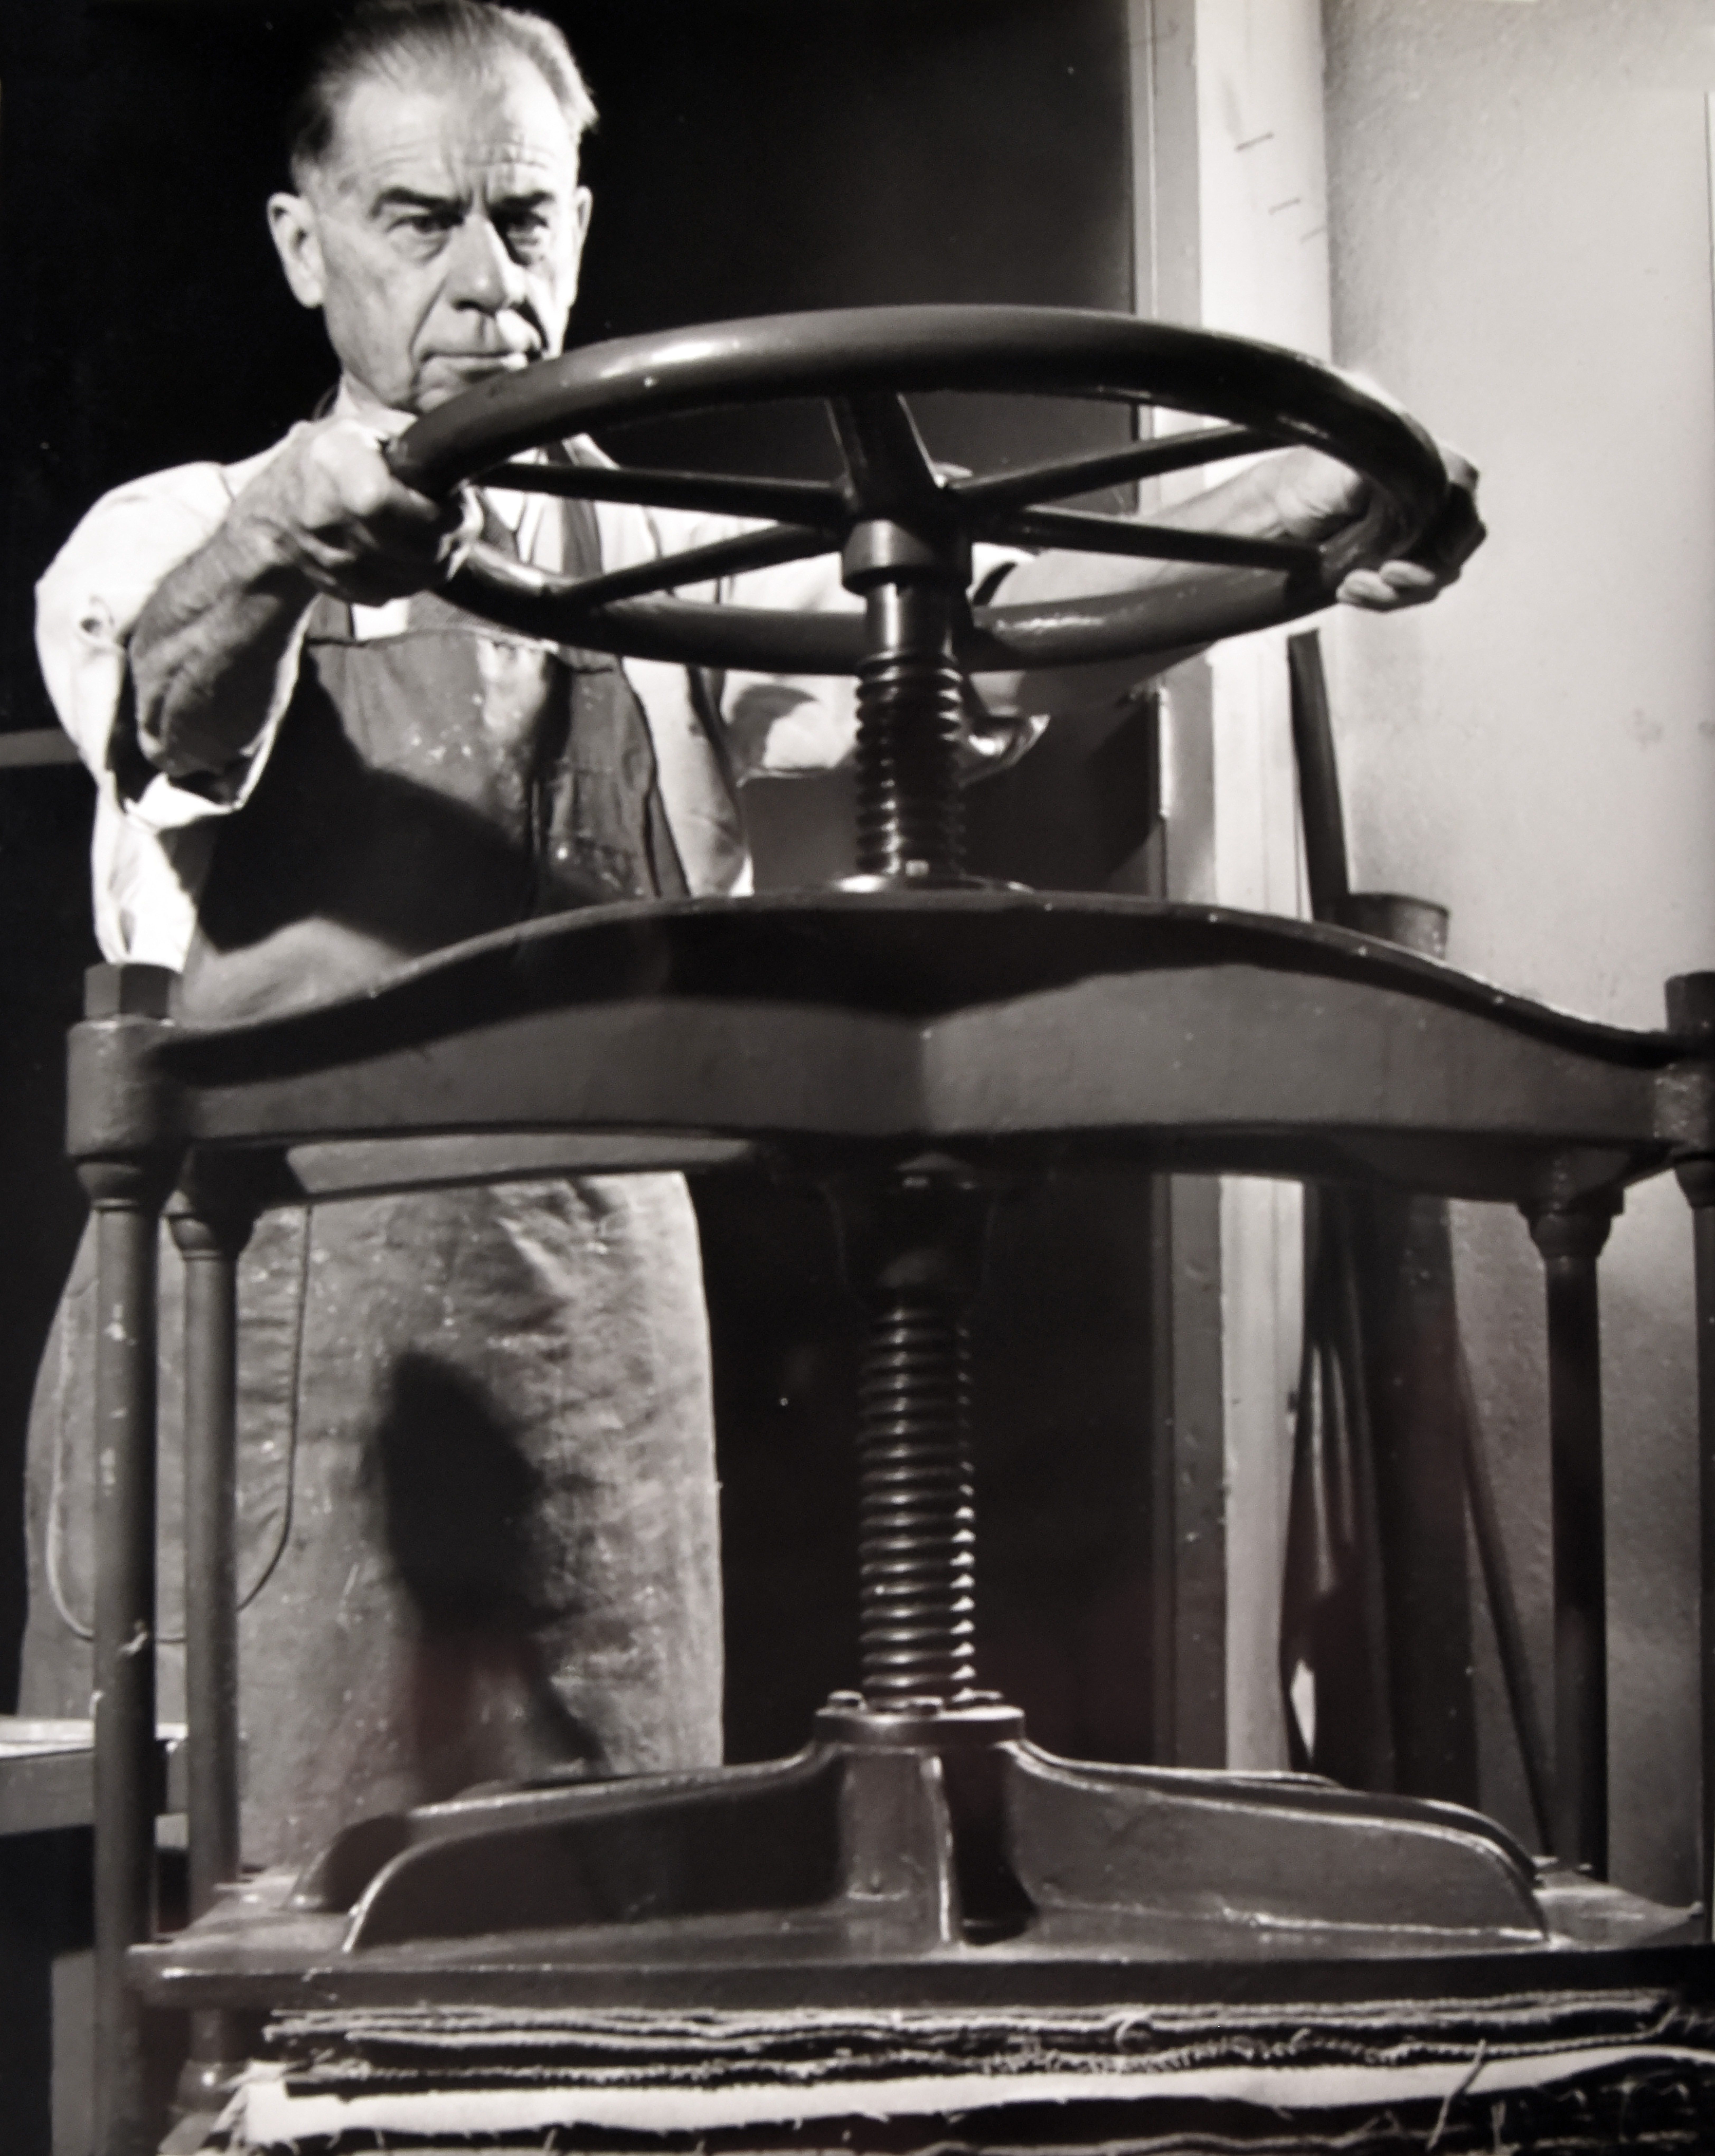 Black and white photo of Harrison Elliott at the paper press. He is rotating the large metal wheel on the top of the press to apply pressure to his handmade paper.